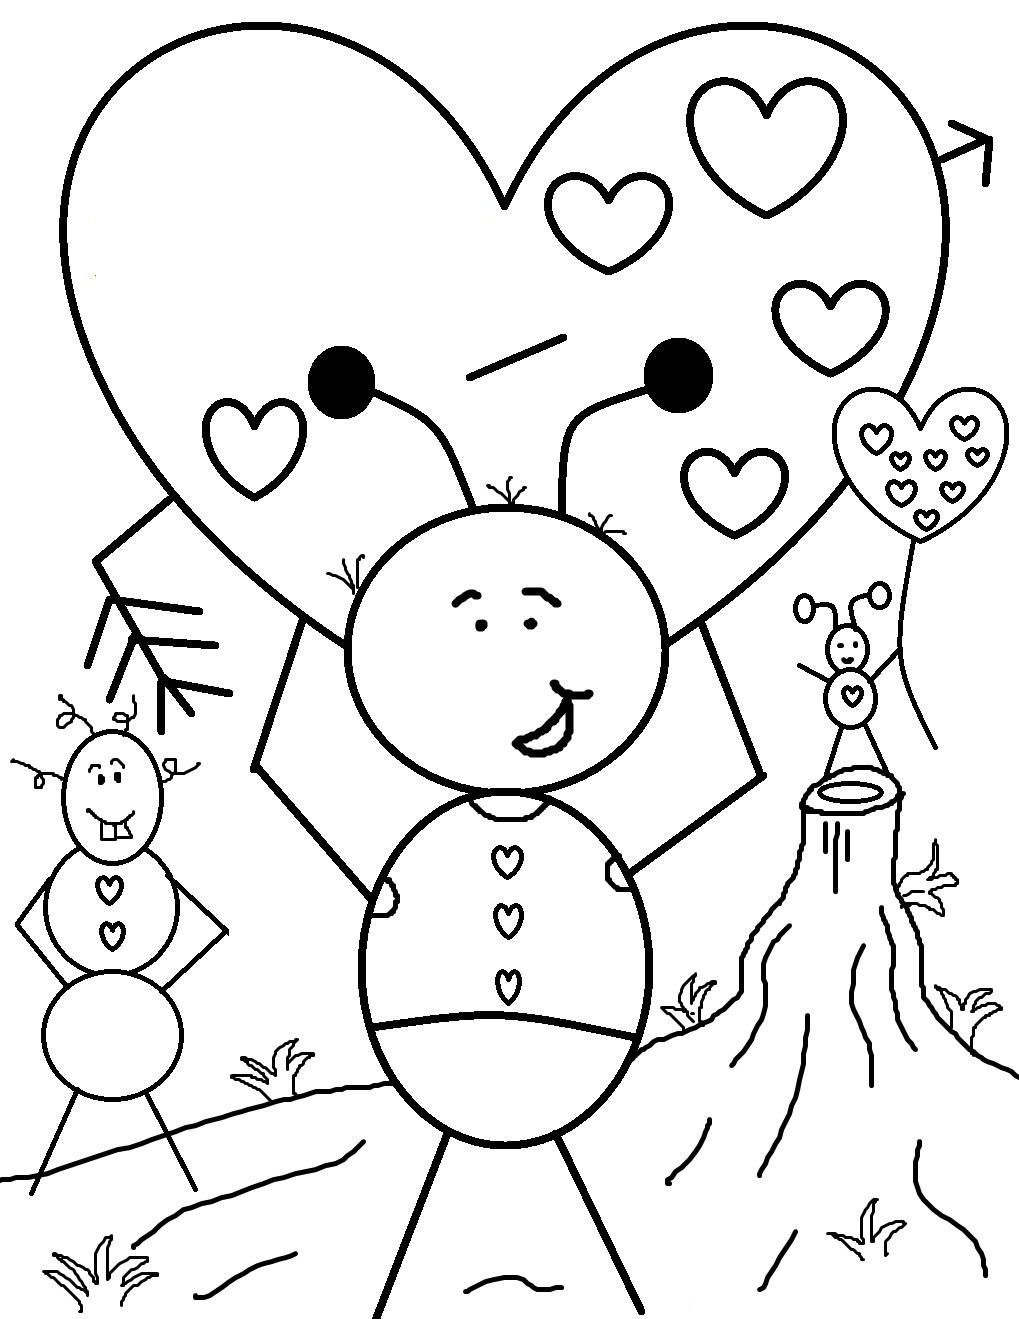 Valentine Printable Coloring Sheets
 Search Results for “Printable Valentine Coloring Pages